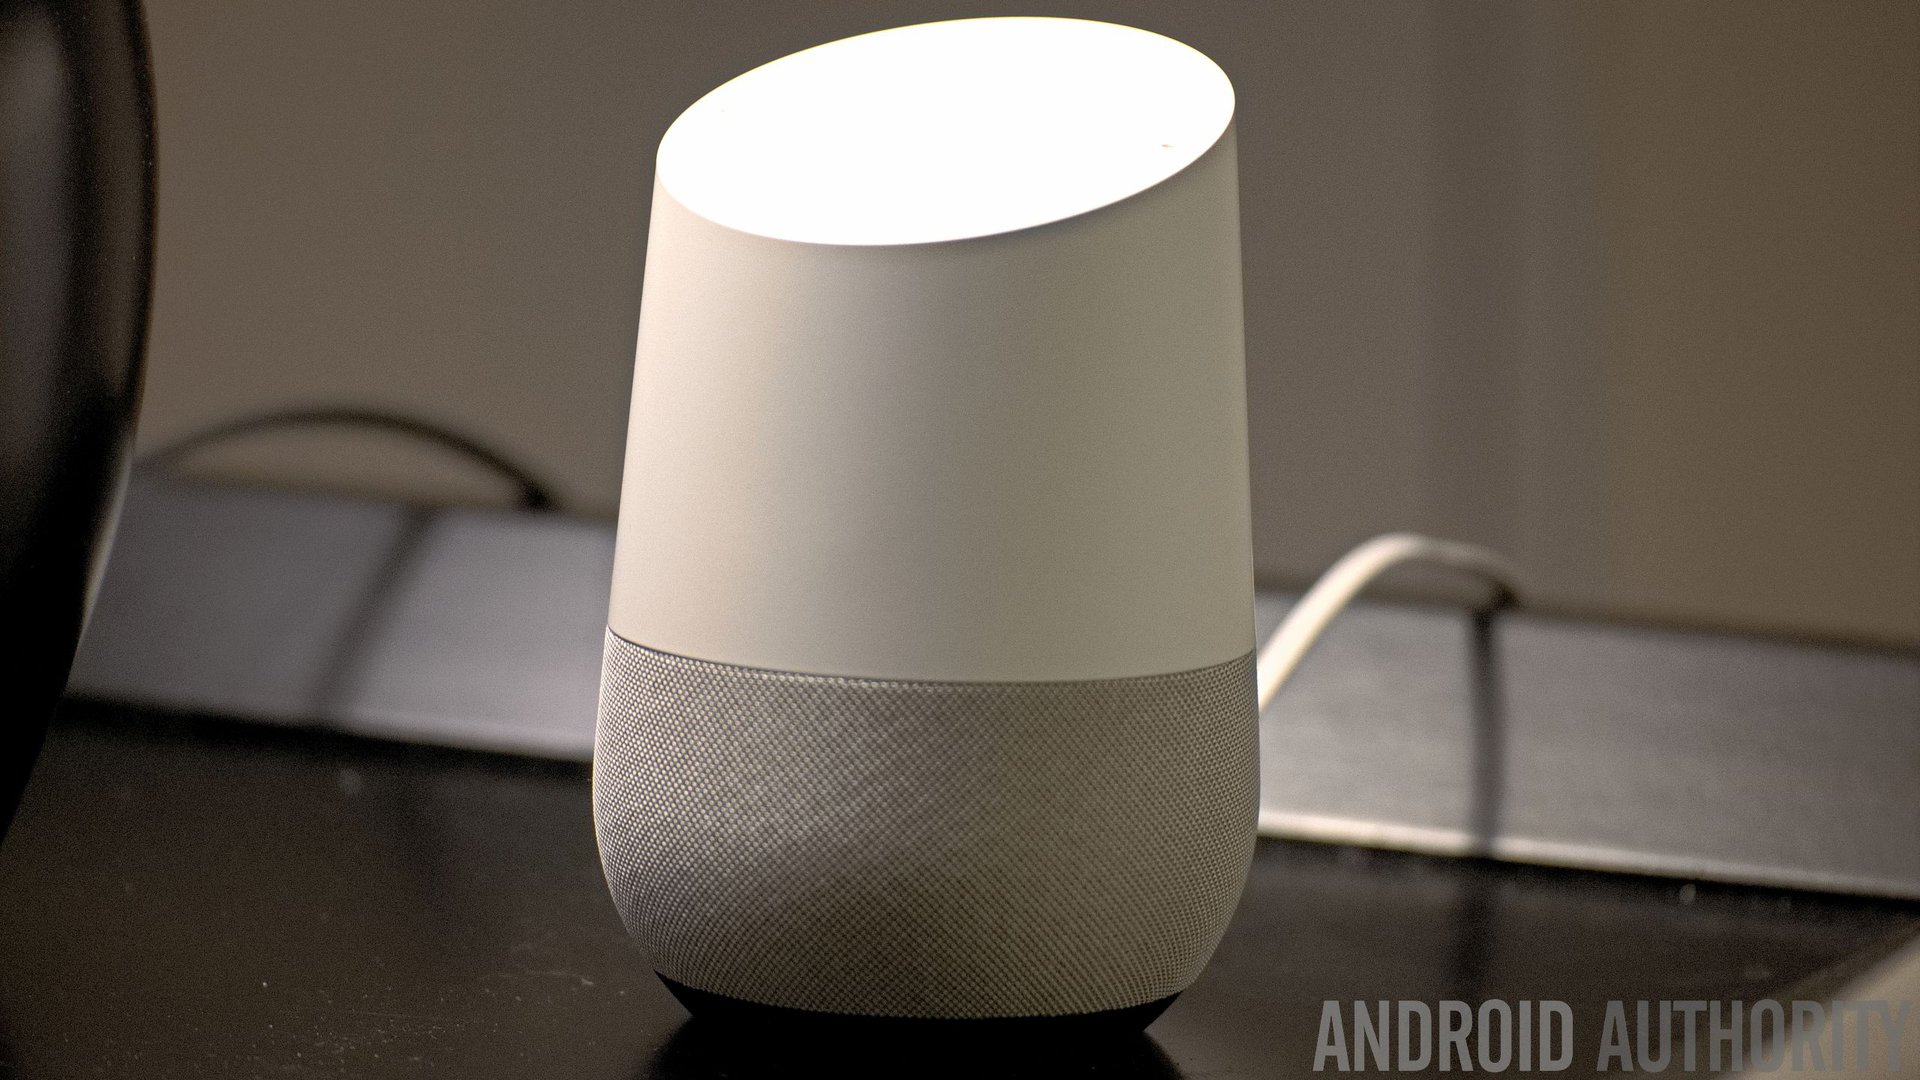 https://www.androidauthority.com/wp-content/uploads/2016/11/Google-Home-Review-15-of-15.jpg